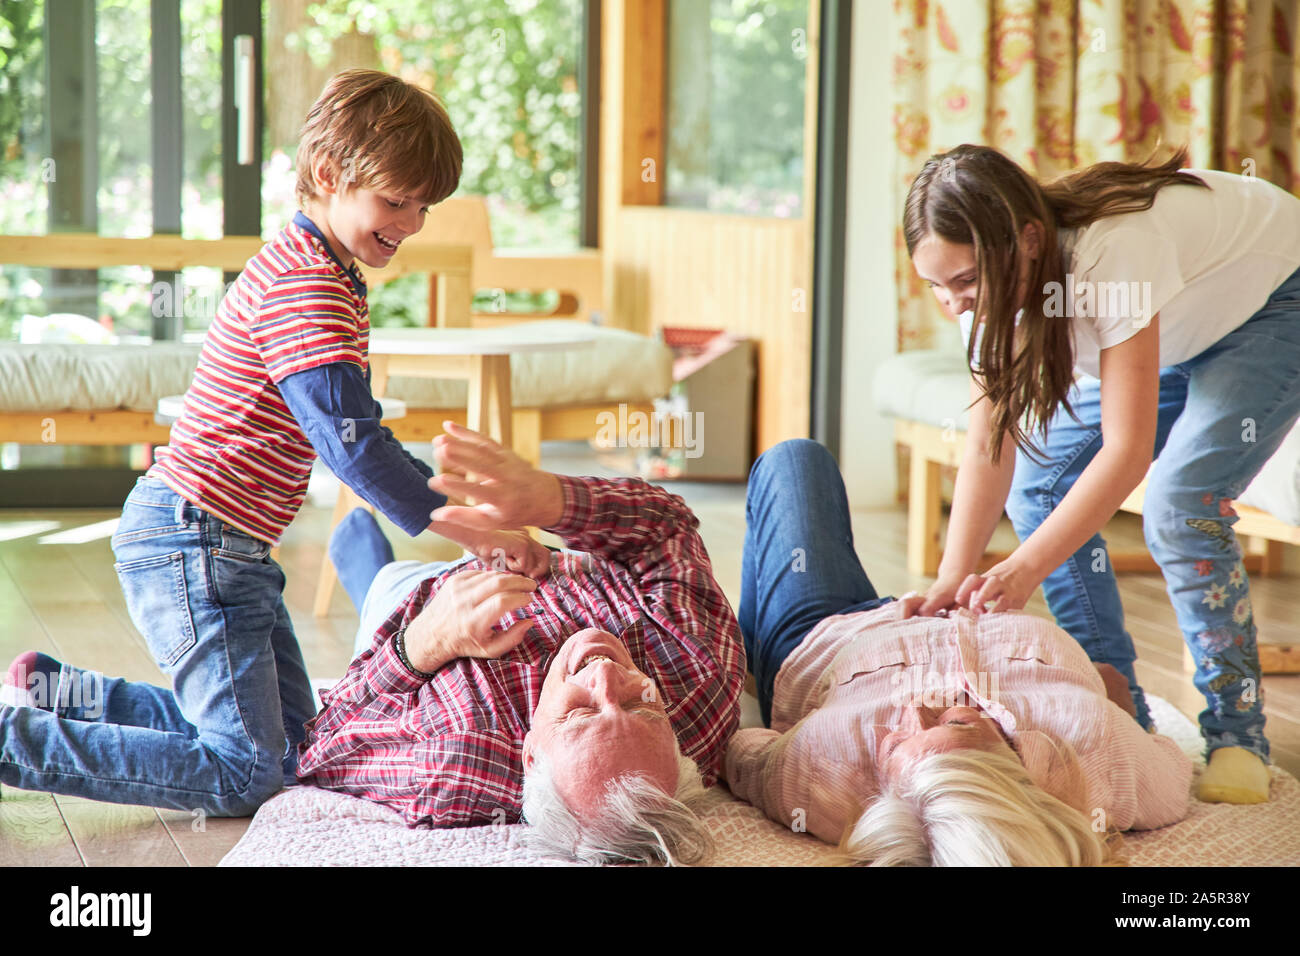 Grandparents on the floor are tickled by their grandchildren Stock Photo